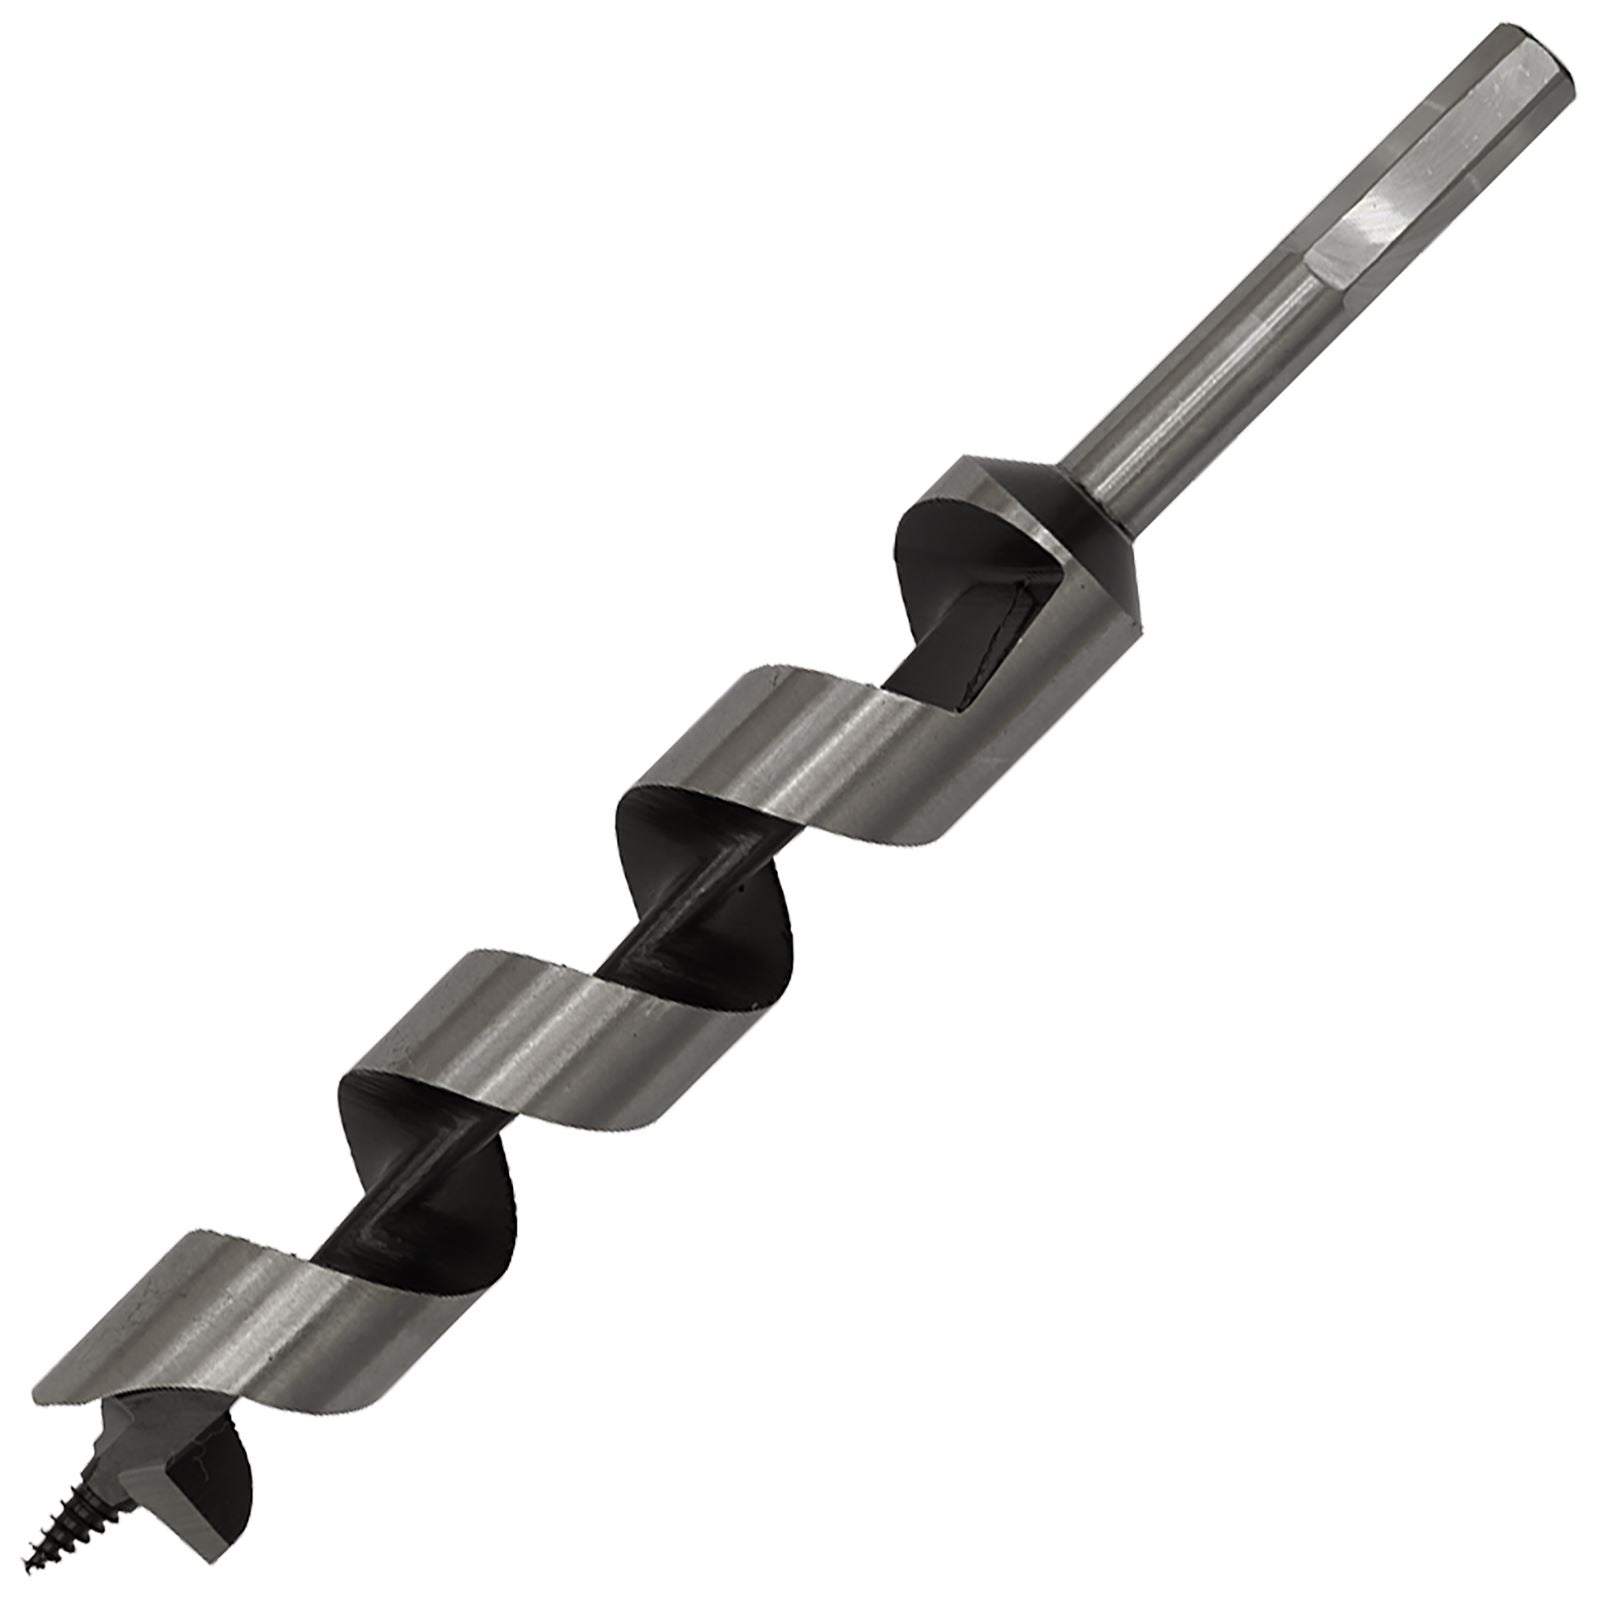 Worksafe by Sealey Auger Wood Drill Bit 28mm x 235mm